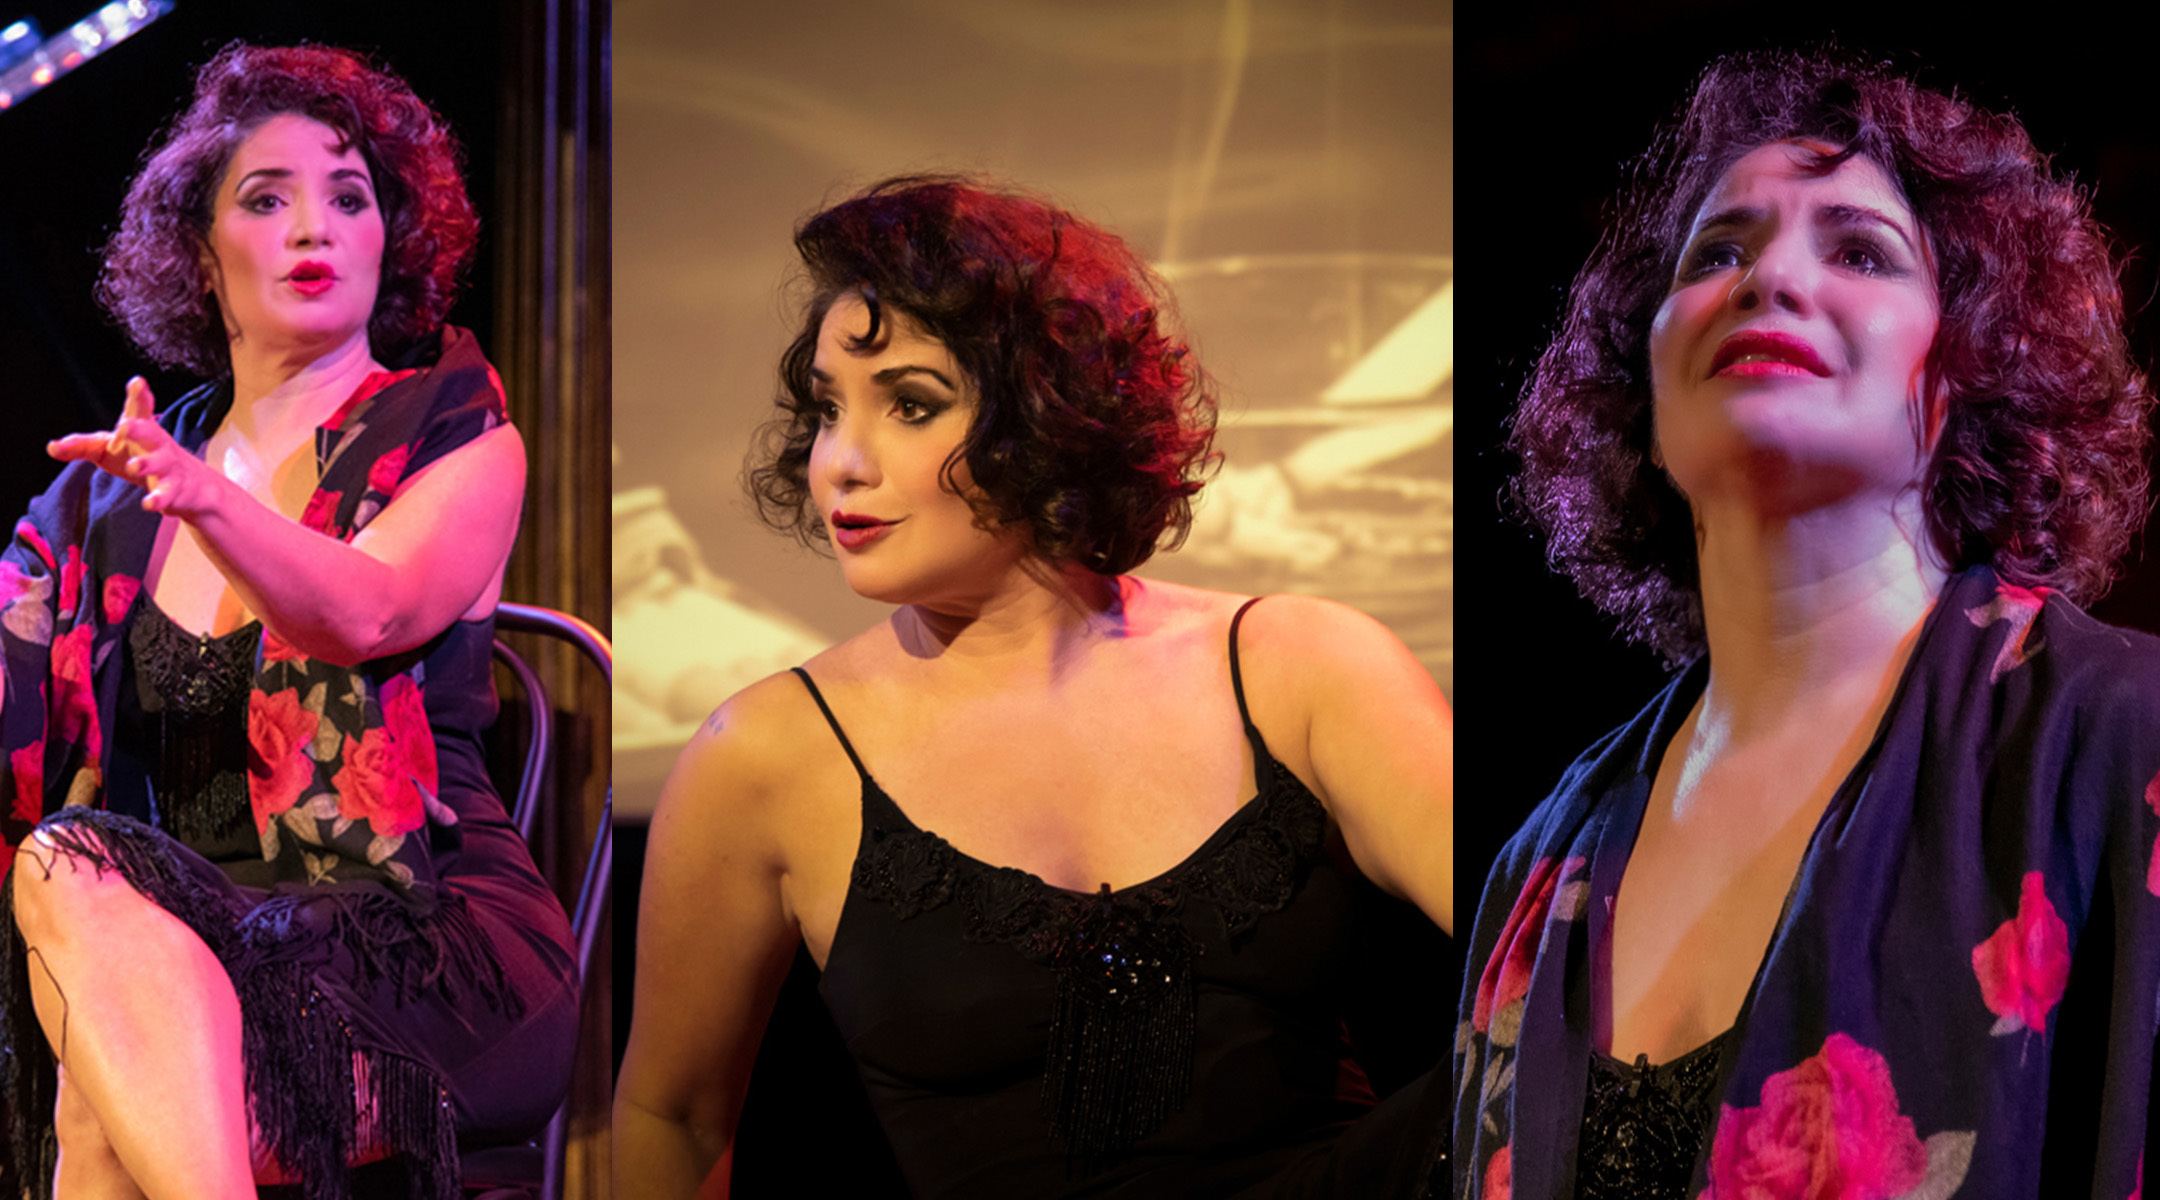 Romy Nordlinger channels Alla Nazimova in her one-woman show “The Garden of Alla,” now playing June 17 through 26, 2022 at Theaterlab in New York. (Photos by David Wayne Fox; courtesy of Remy Nordlinger)